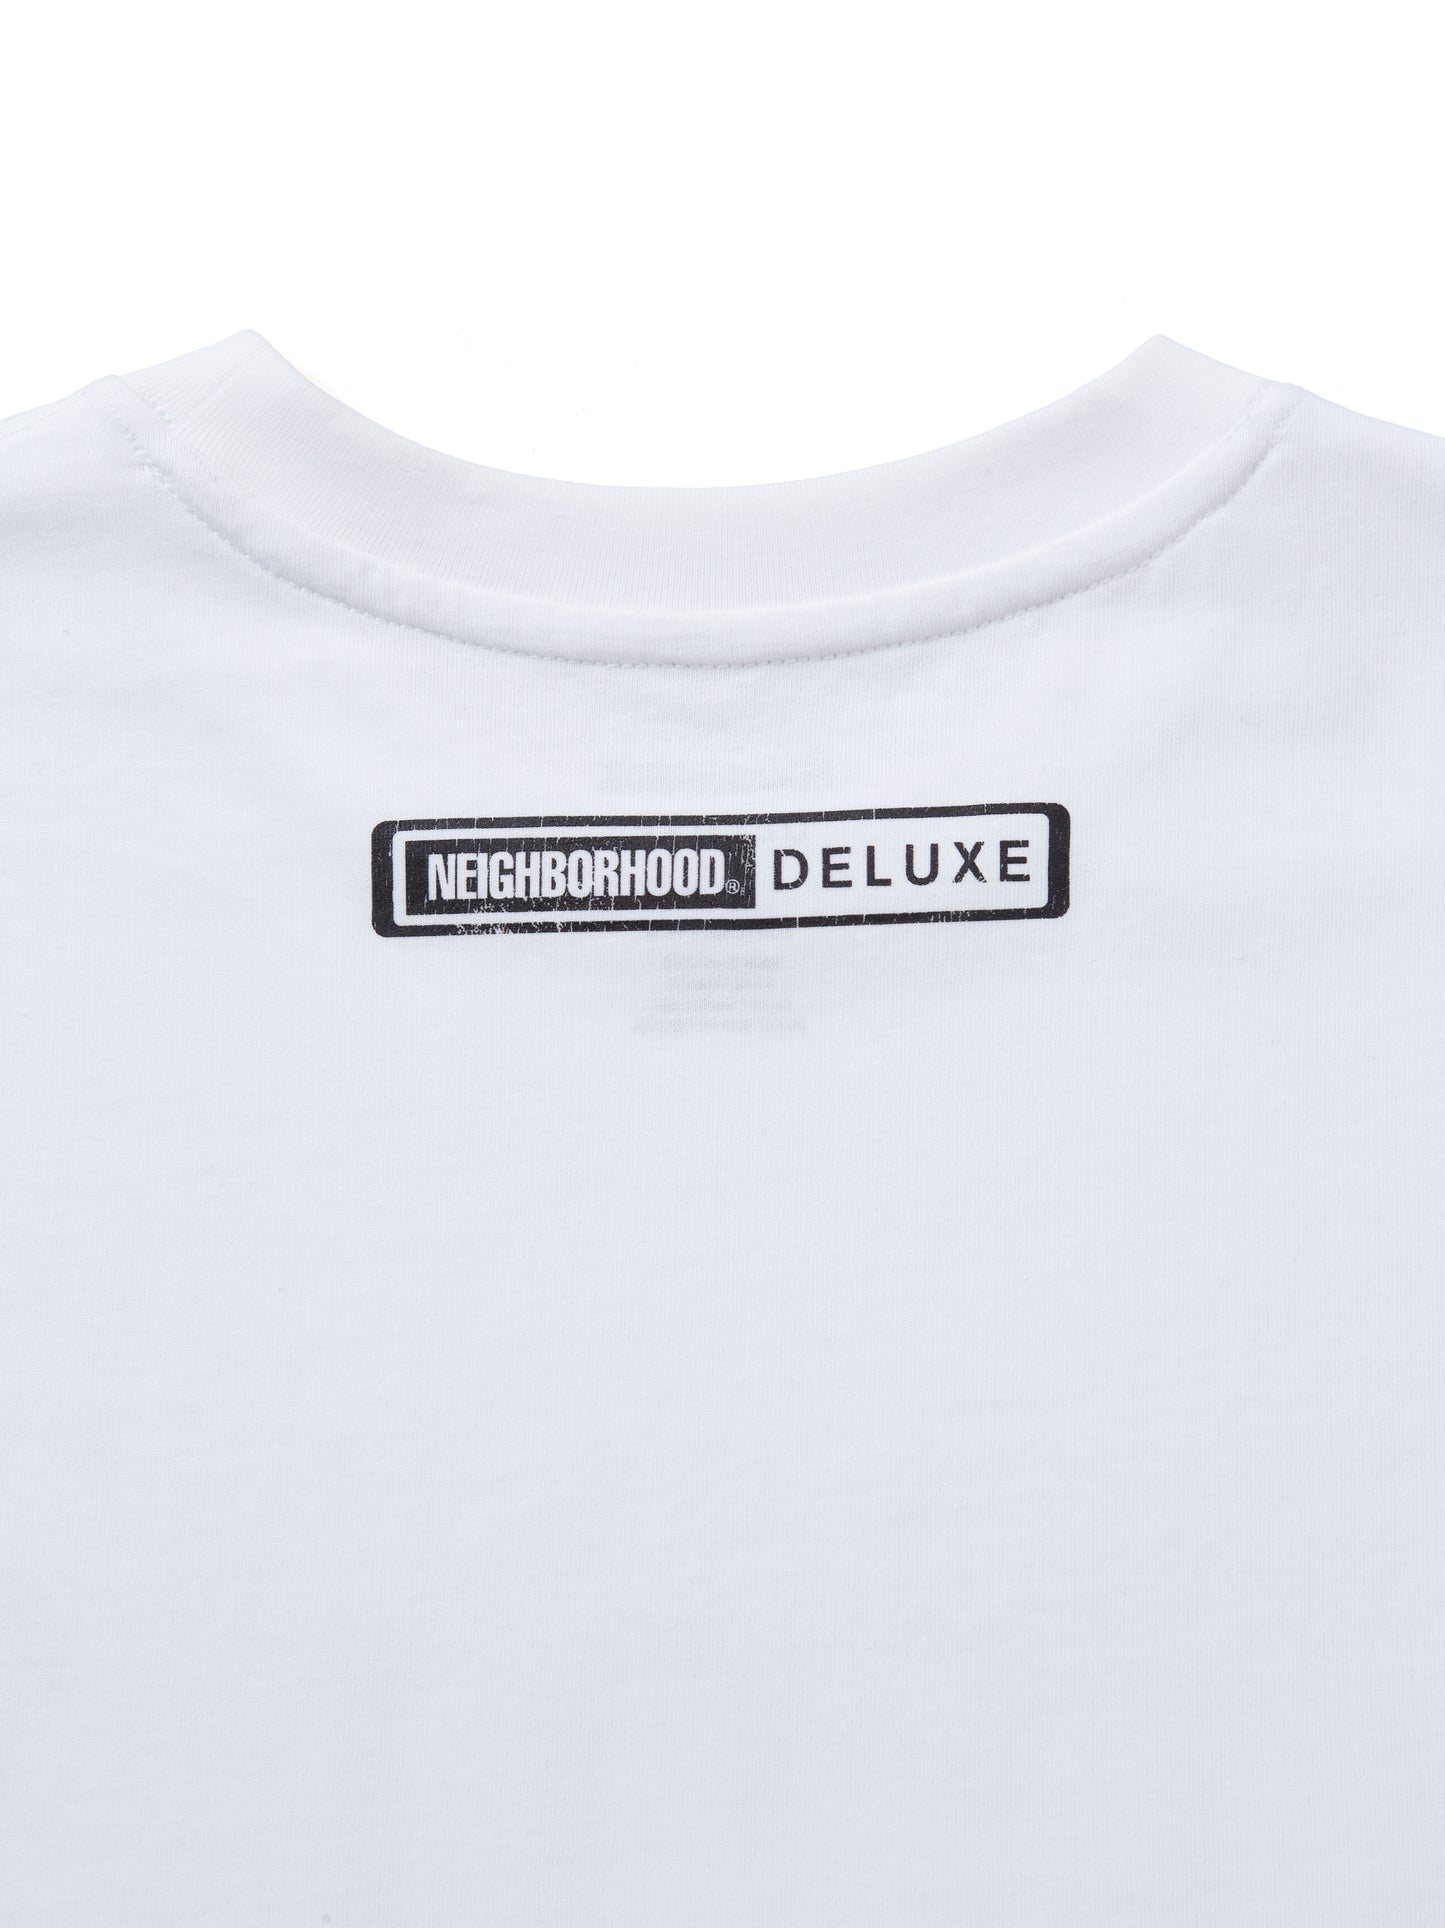 NH X DELUXE . TEE SS　WHITE